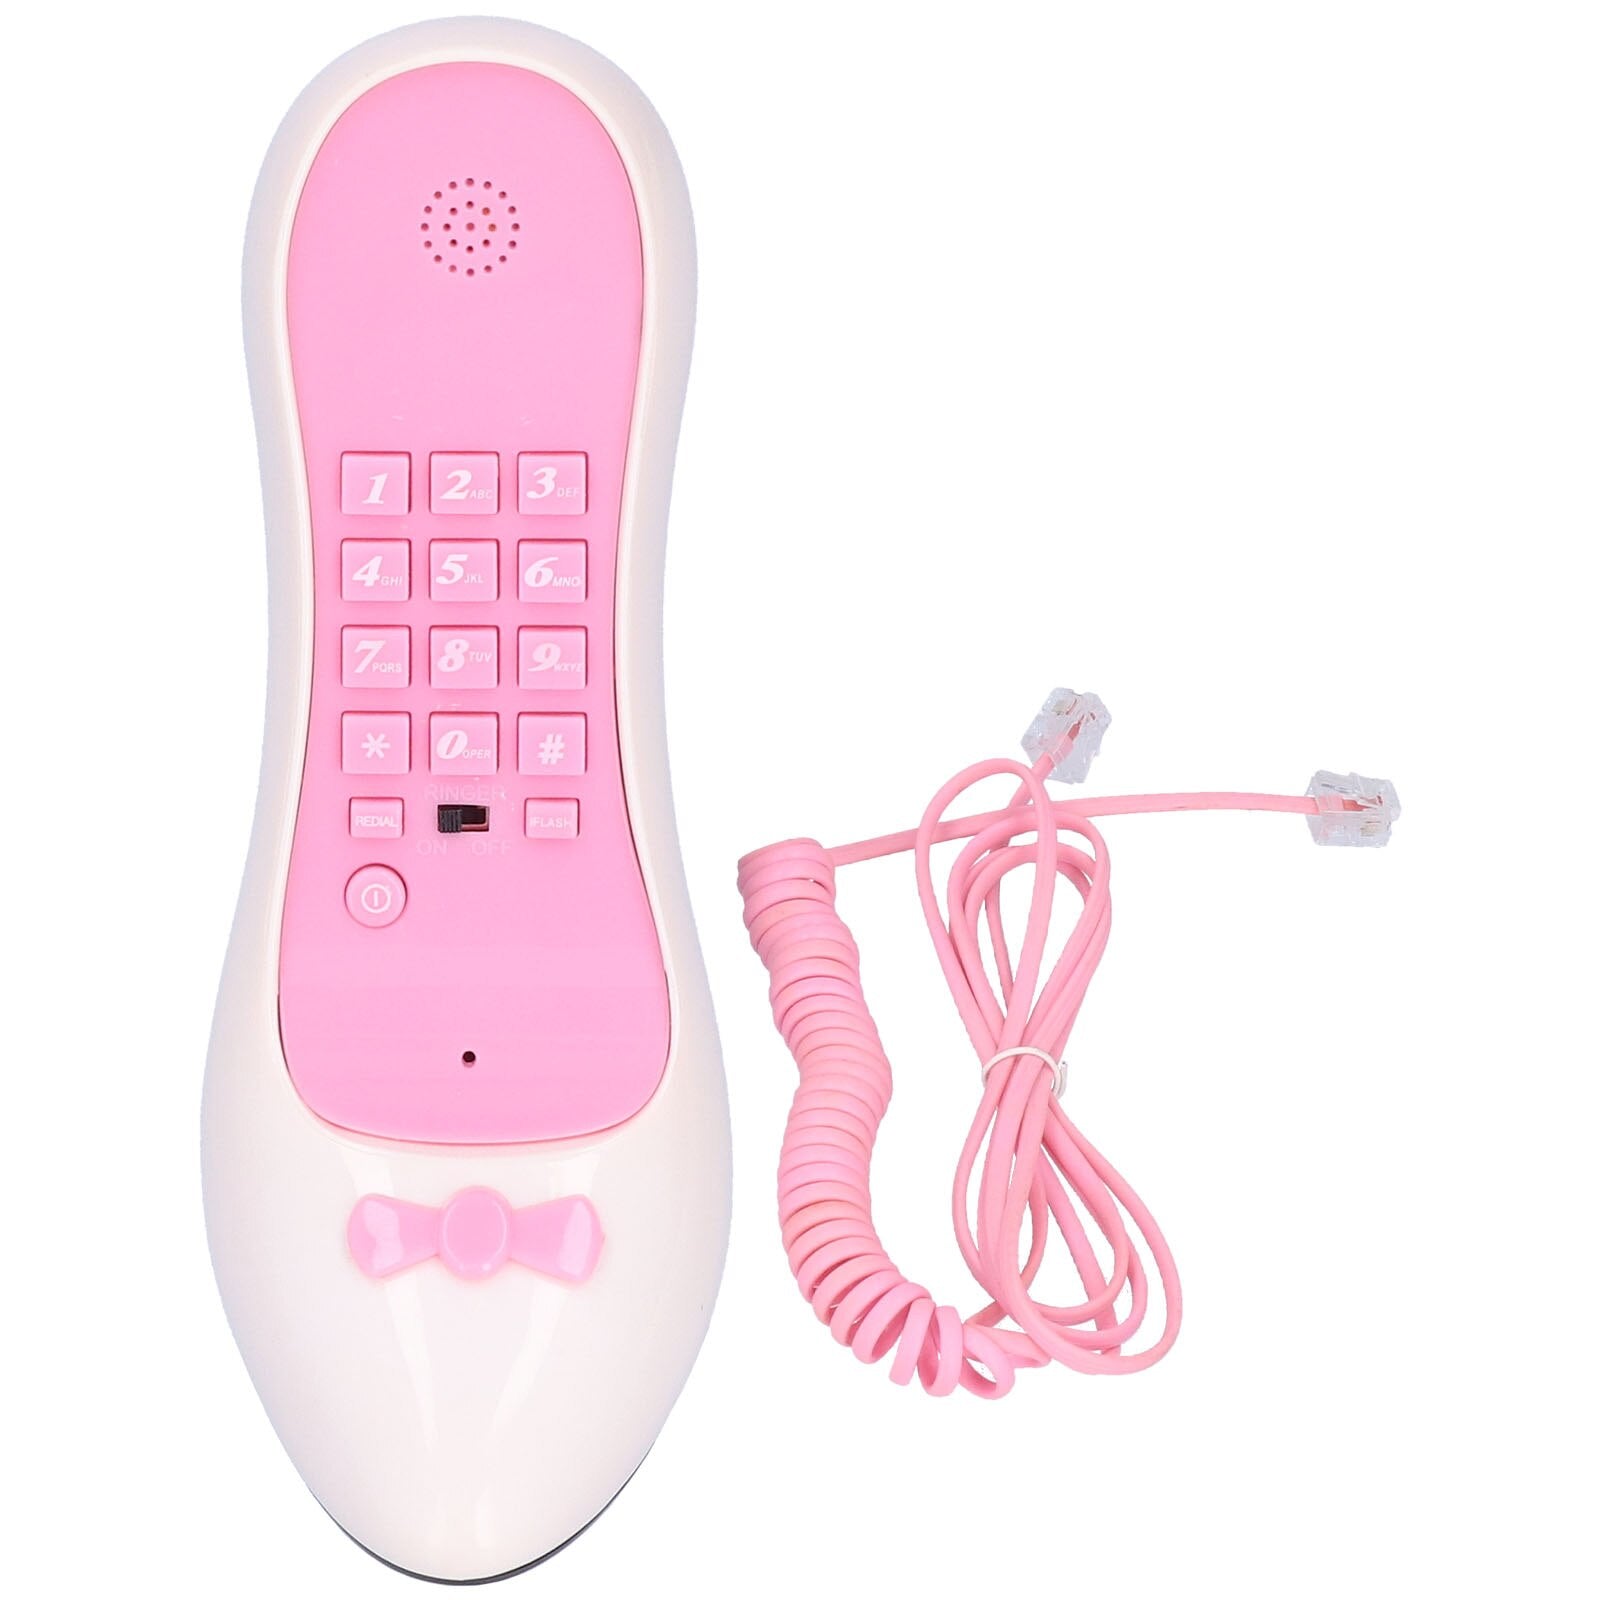 High Heel Corded Telephone Wired Novelty Funny Shaped Phones Furniture Decoration